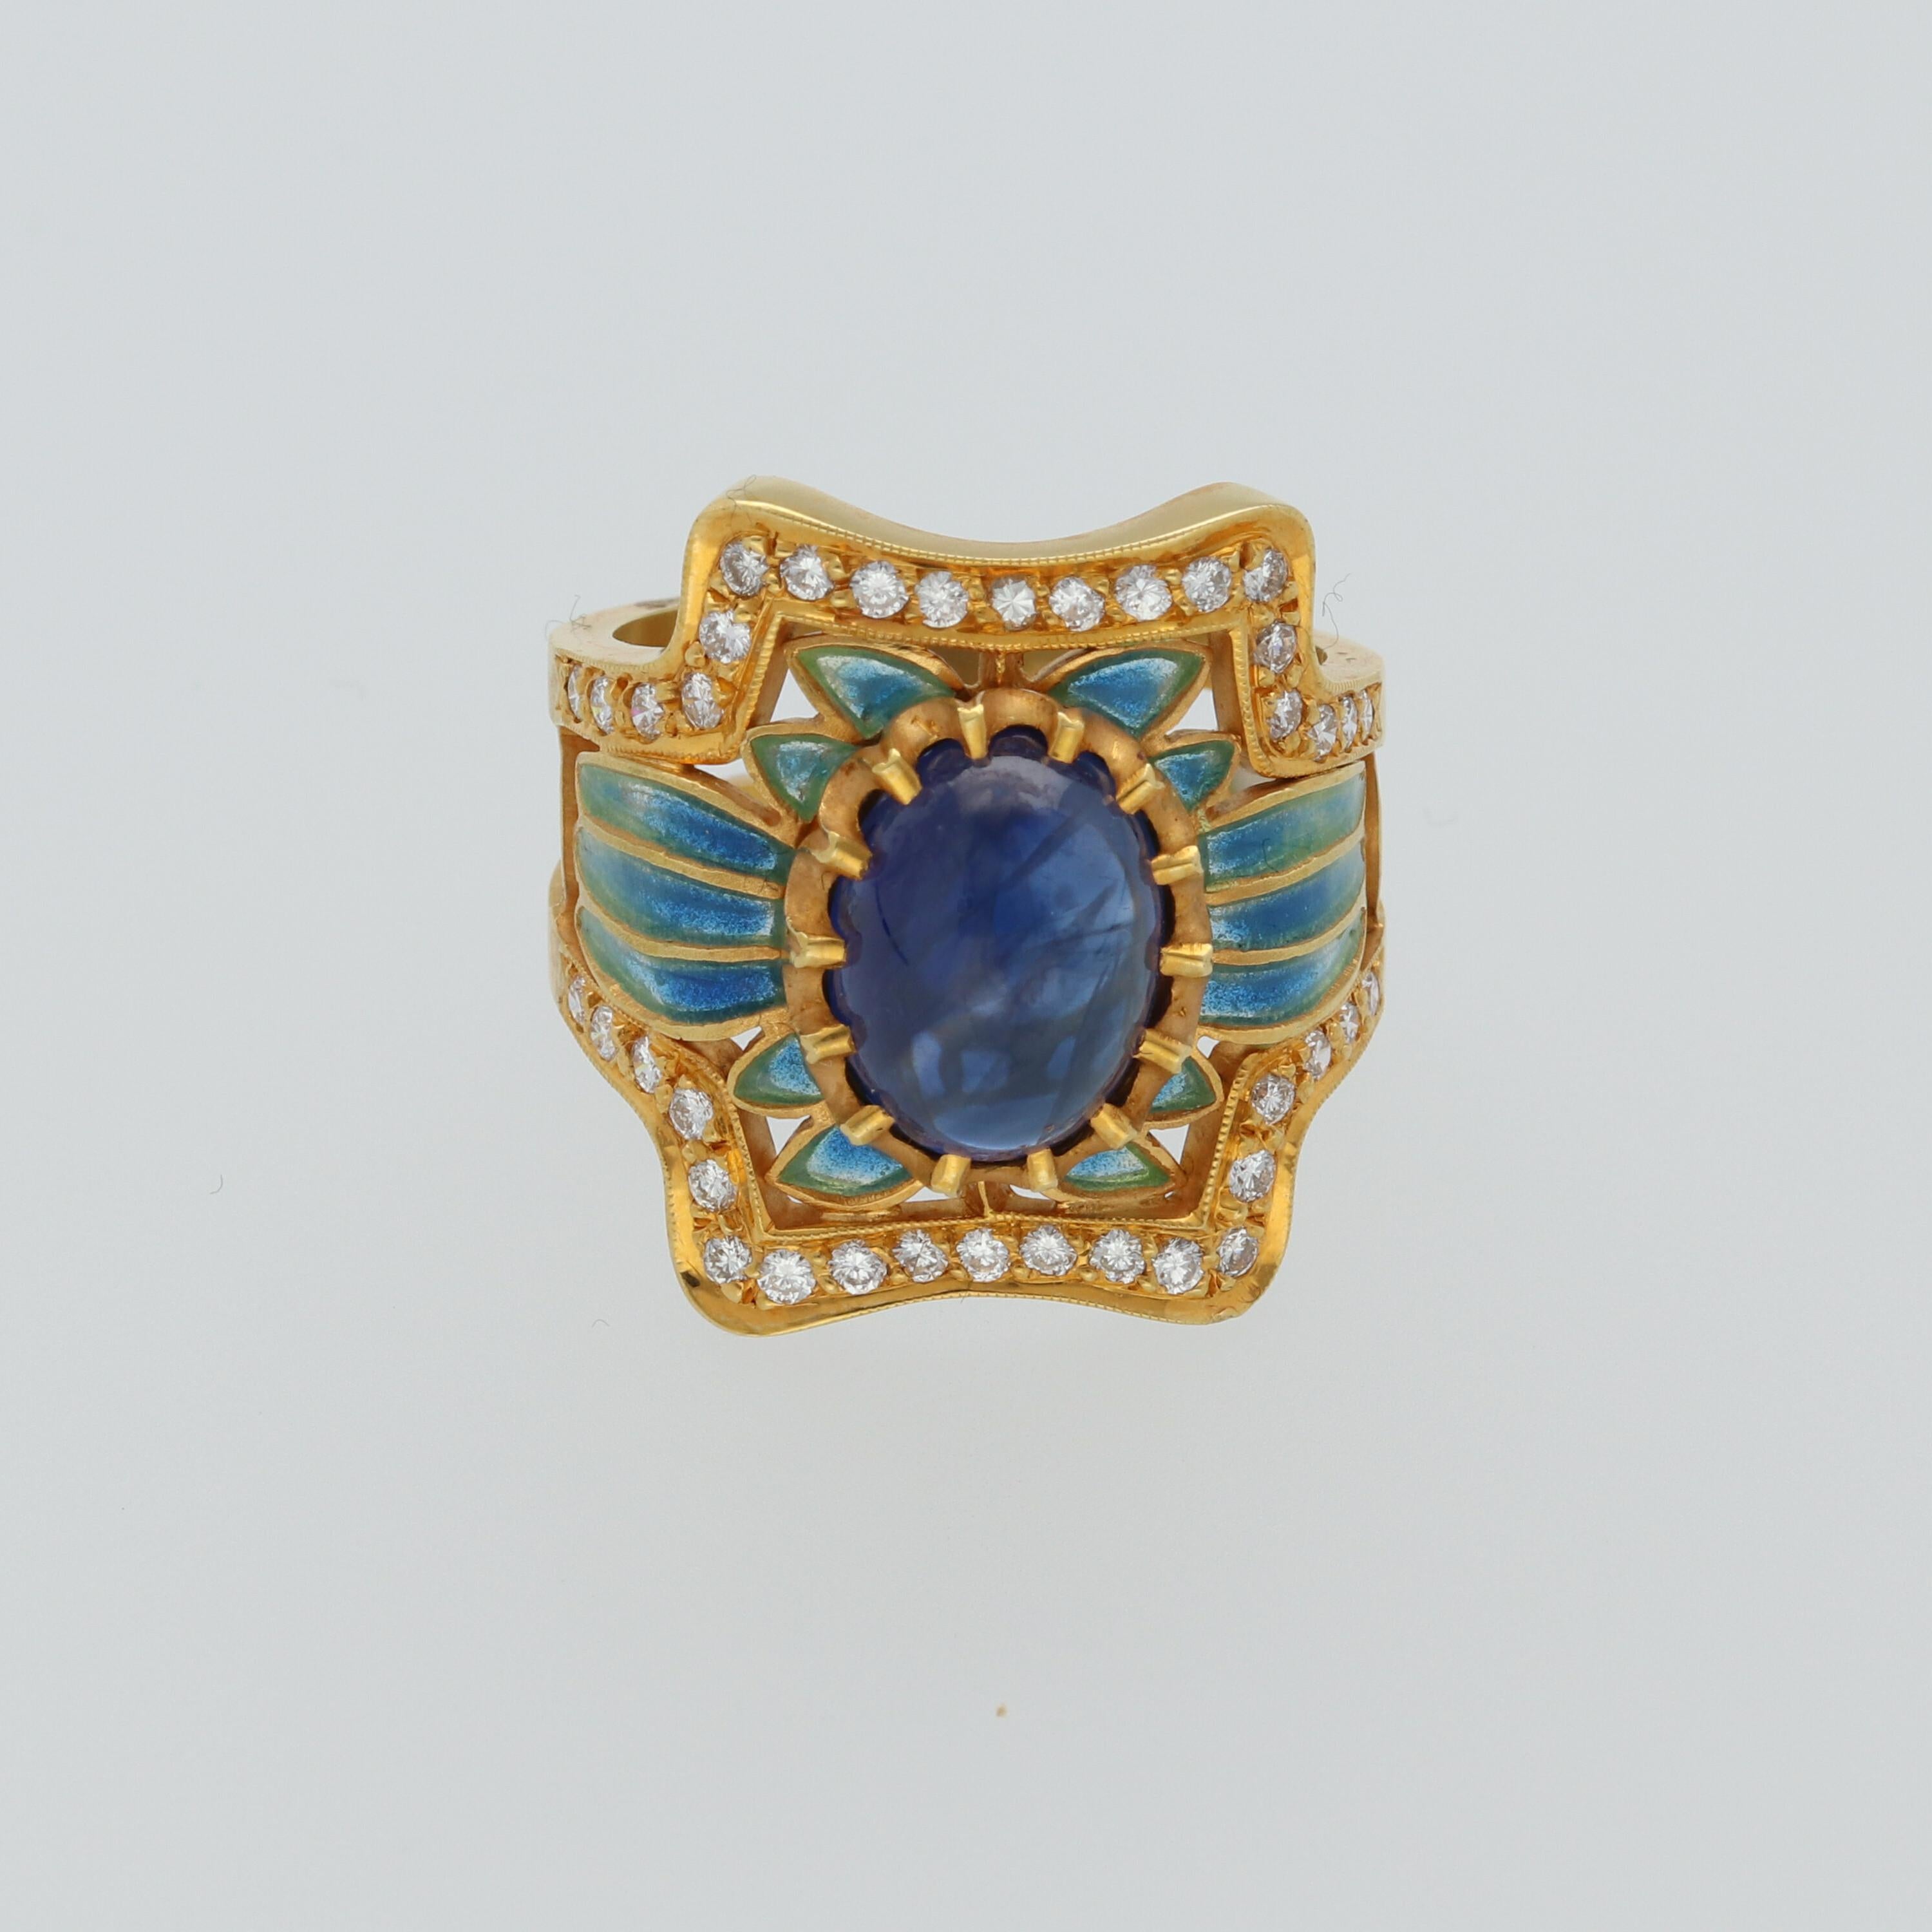 A Masriera Modernist fashion ring, set with a blue sapphire cabochon, weighing 3.8 carats, centered in a naturalistic plique-à-jour enamel, accented with circular-cut diamonds, weighing 0.57 carats, mounted in 18K yellow mat gold.

Size EU 52.5 -